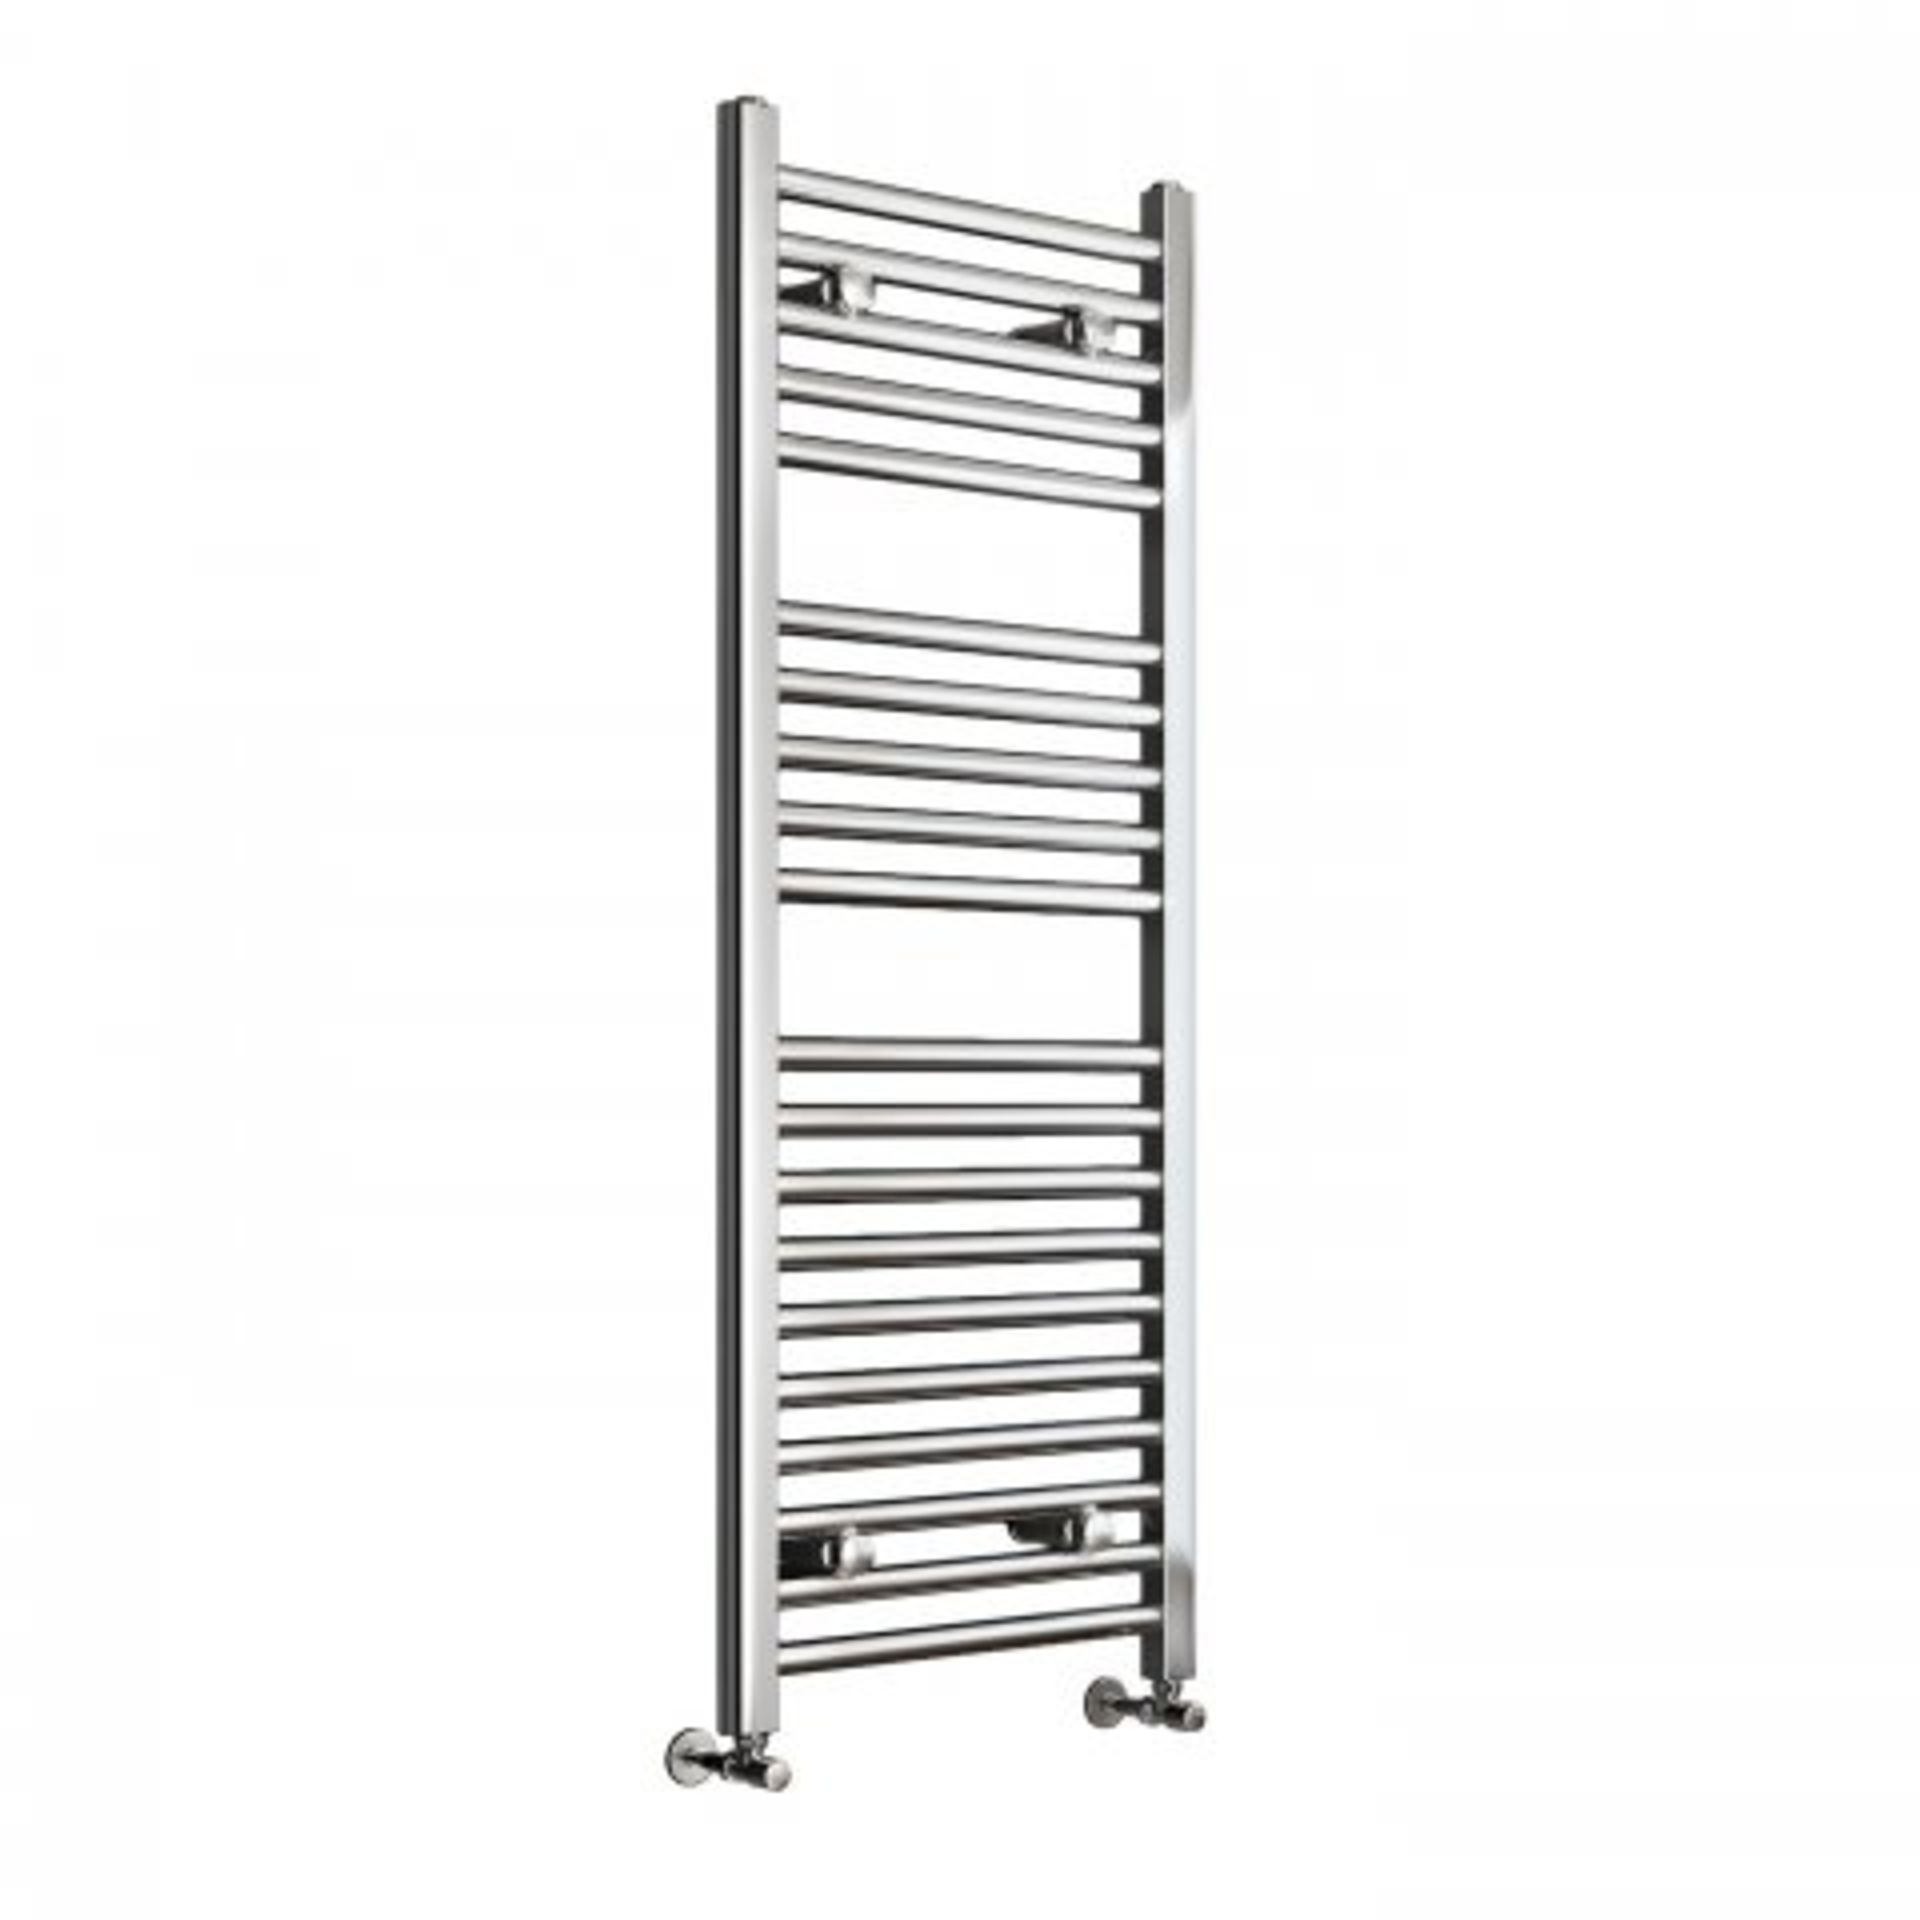 (L44) (L44) 1200x450mm - 25mm Tubes - Chrome Heated Straight Rail Ladder Towel Radiator Benefit from - Image 3 of 3